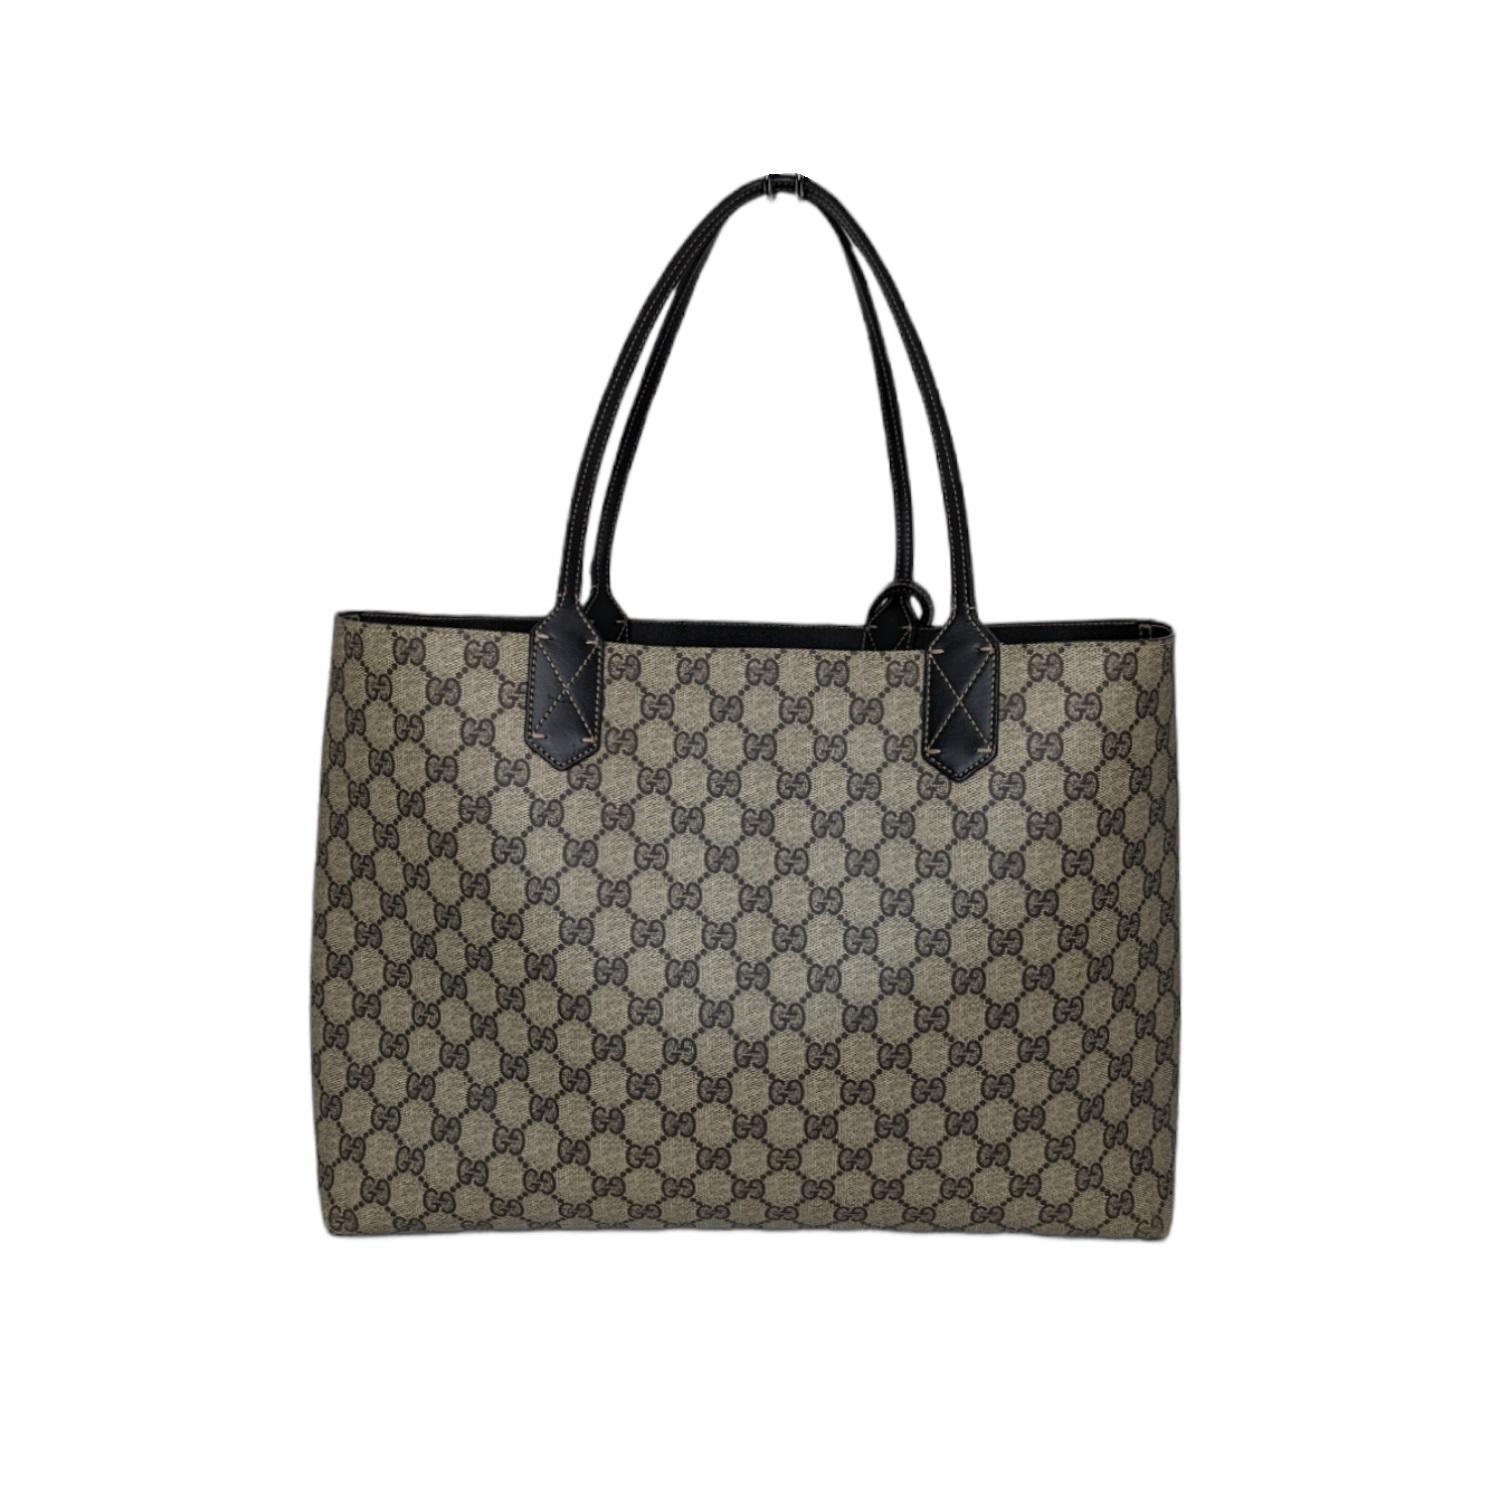 This stylish Medium-size lightweight carryall tote is crafted of classic Gucci GG monogram coated canvas. The bag features very tall leather strap top handles. There is a broad top opening to a reversible black textured calfskin interior that is